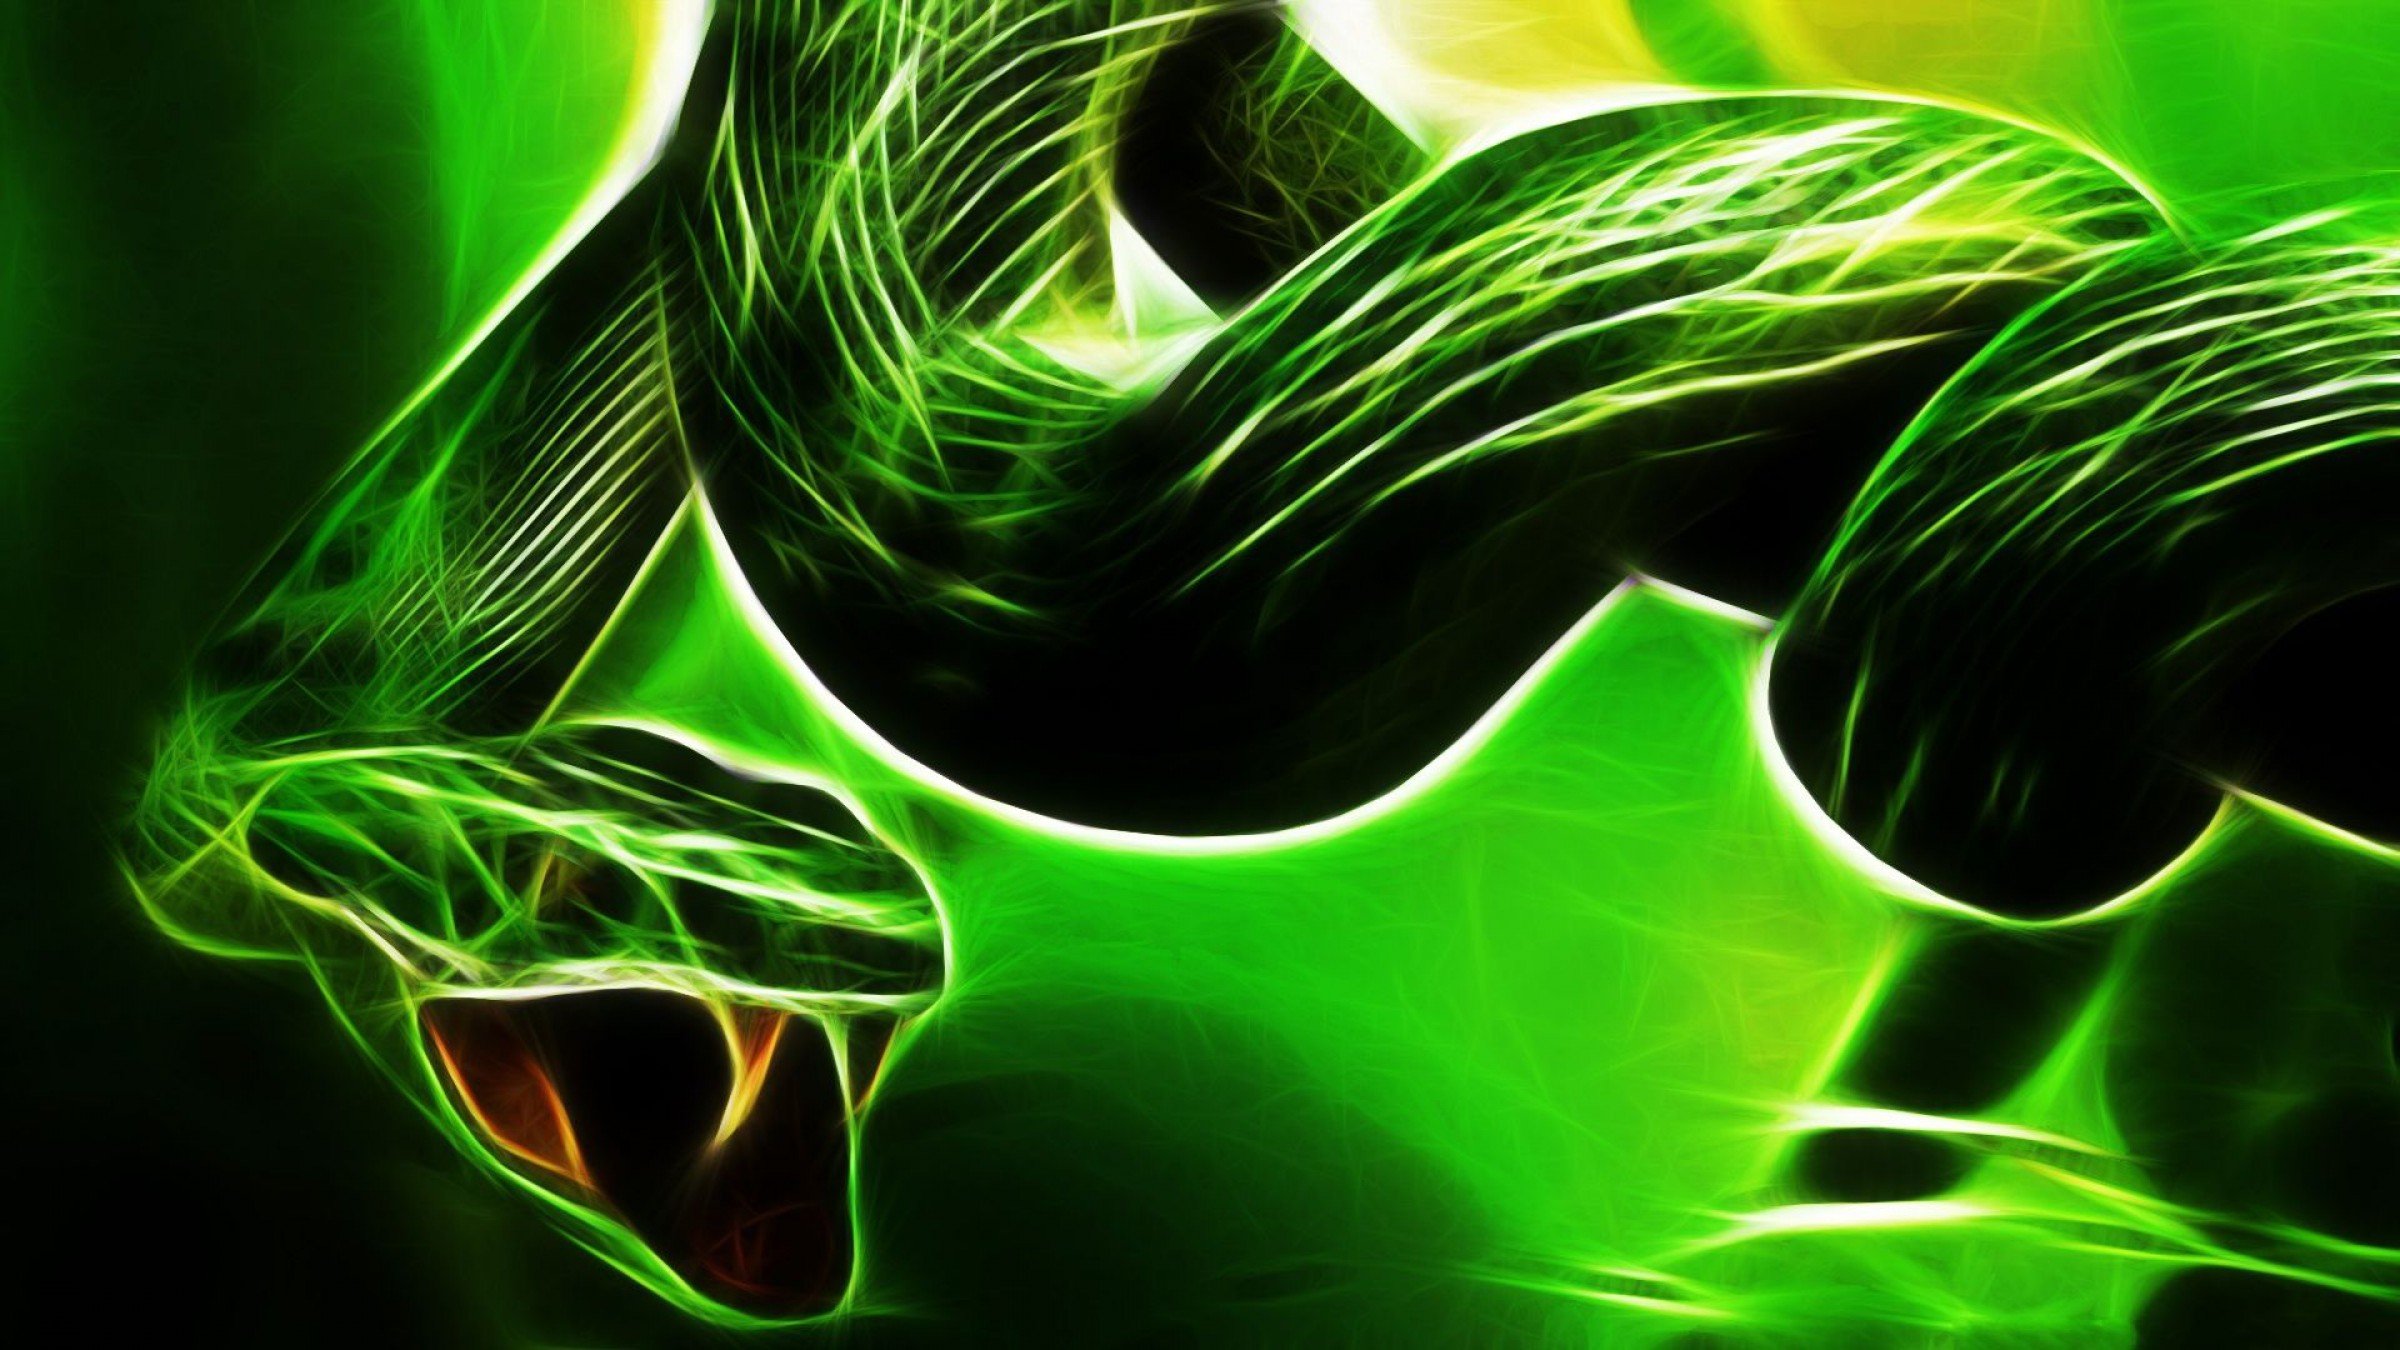 razer, Gaming, Computer, Game Wallpapers HD / Desktop and Mobile Background...